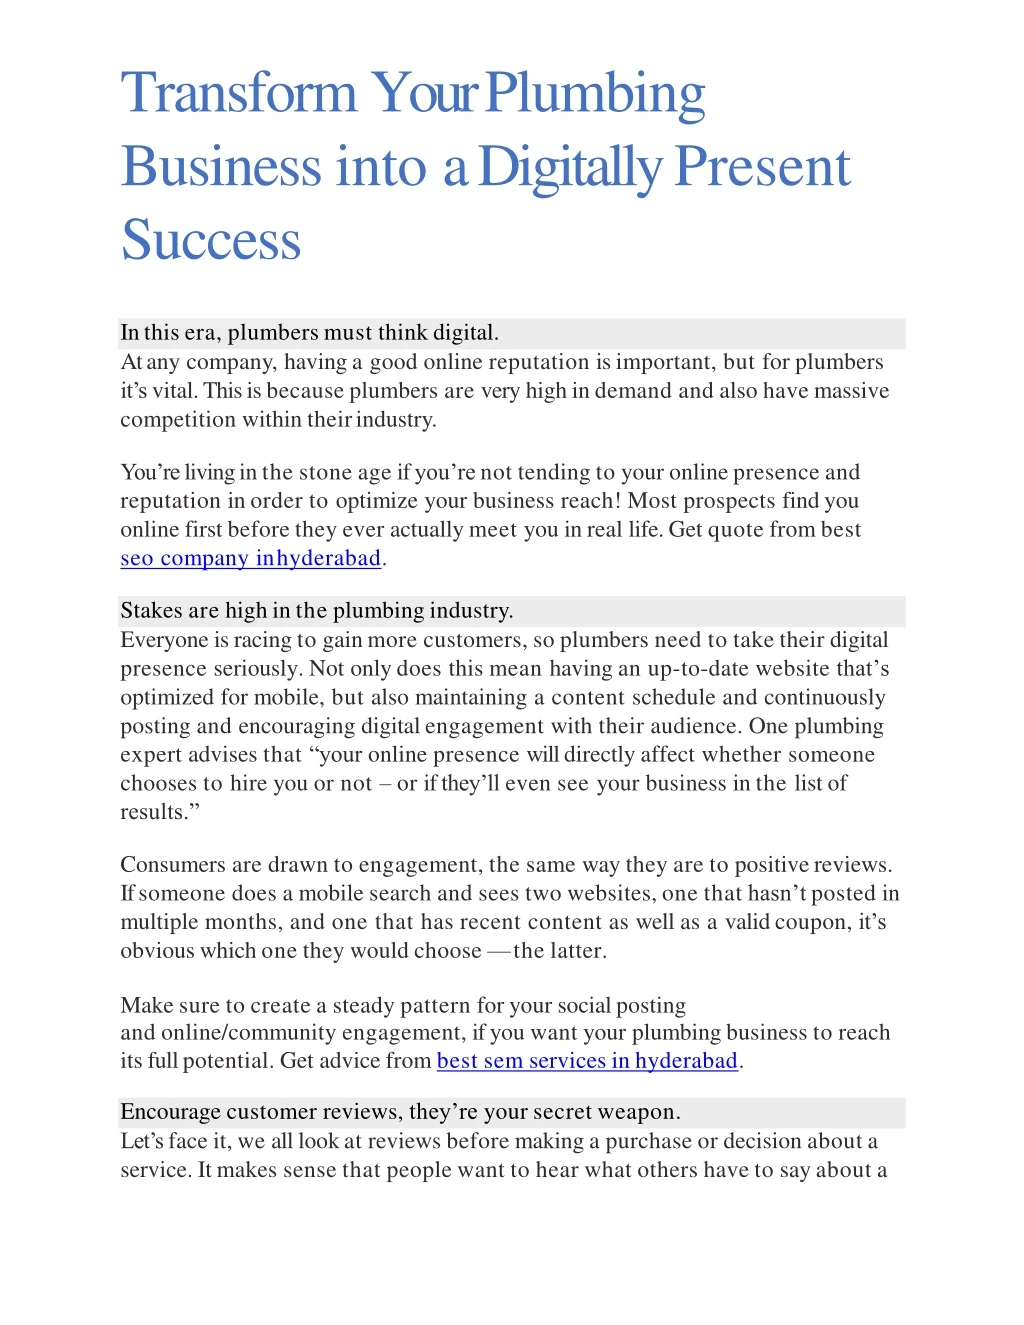 transform your plumbing business into a digitally present success